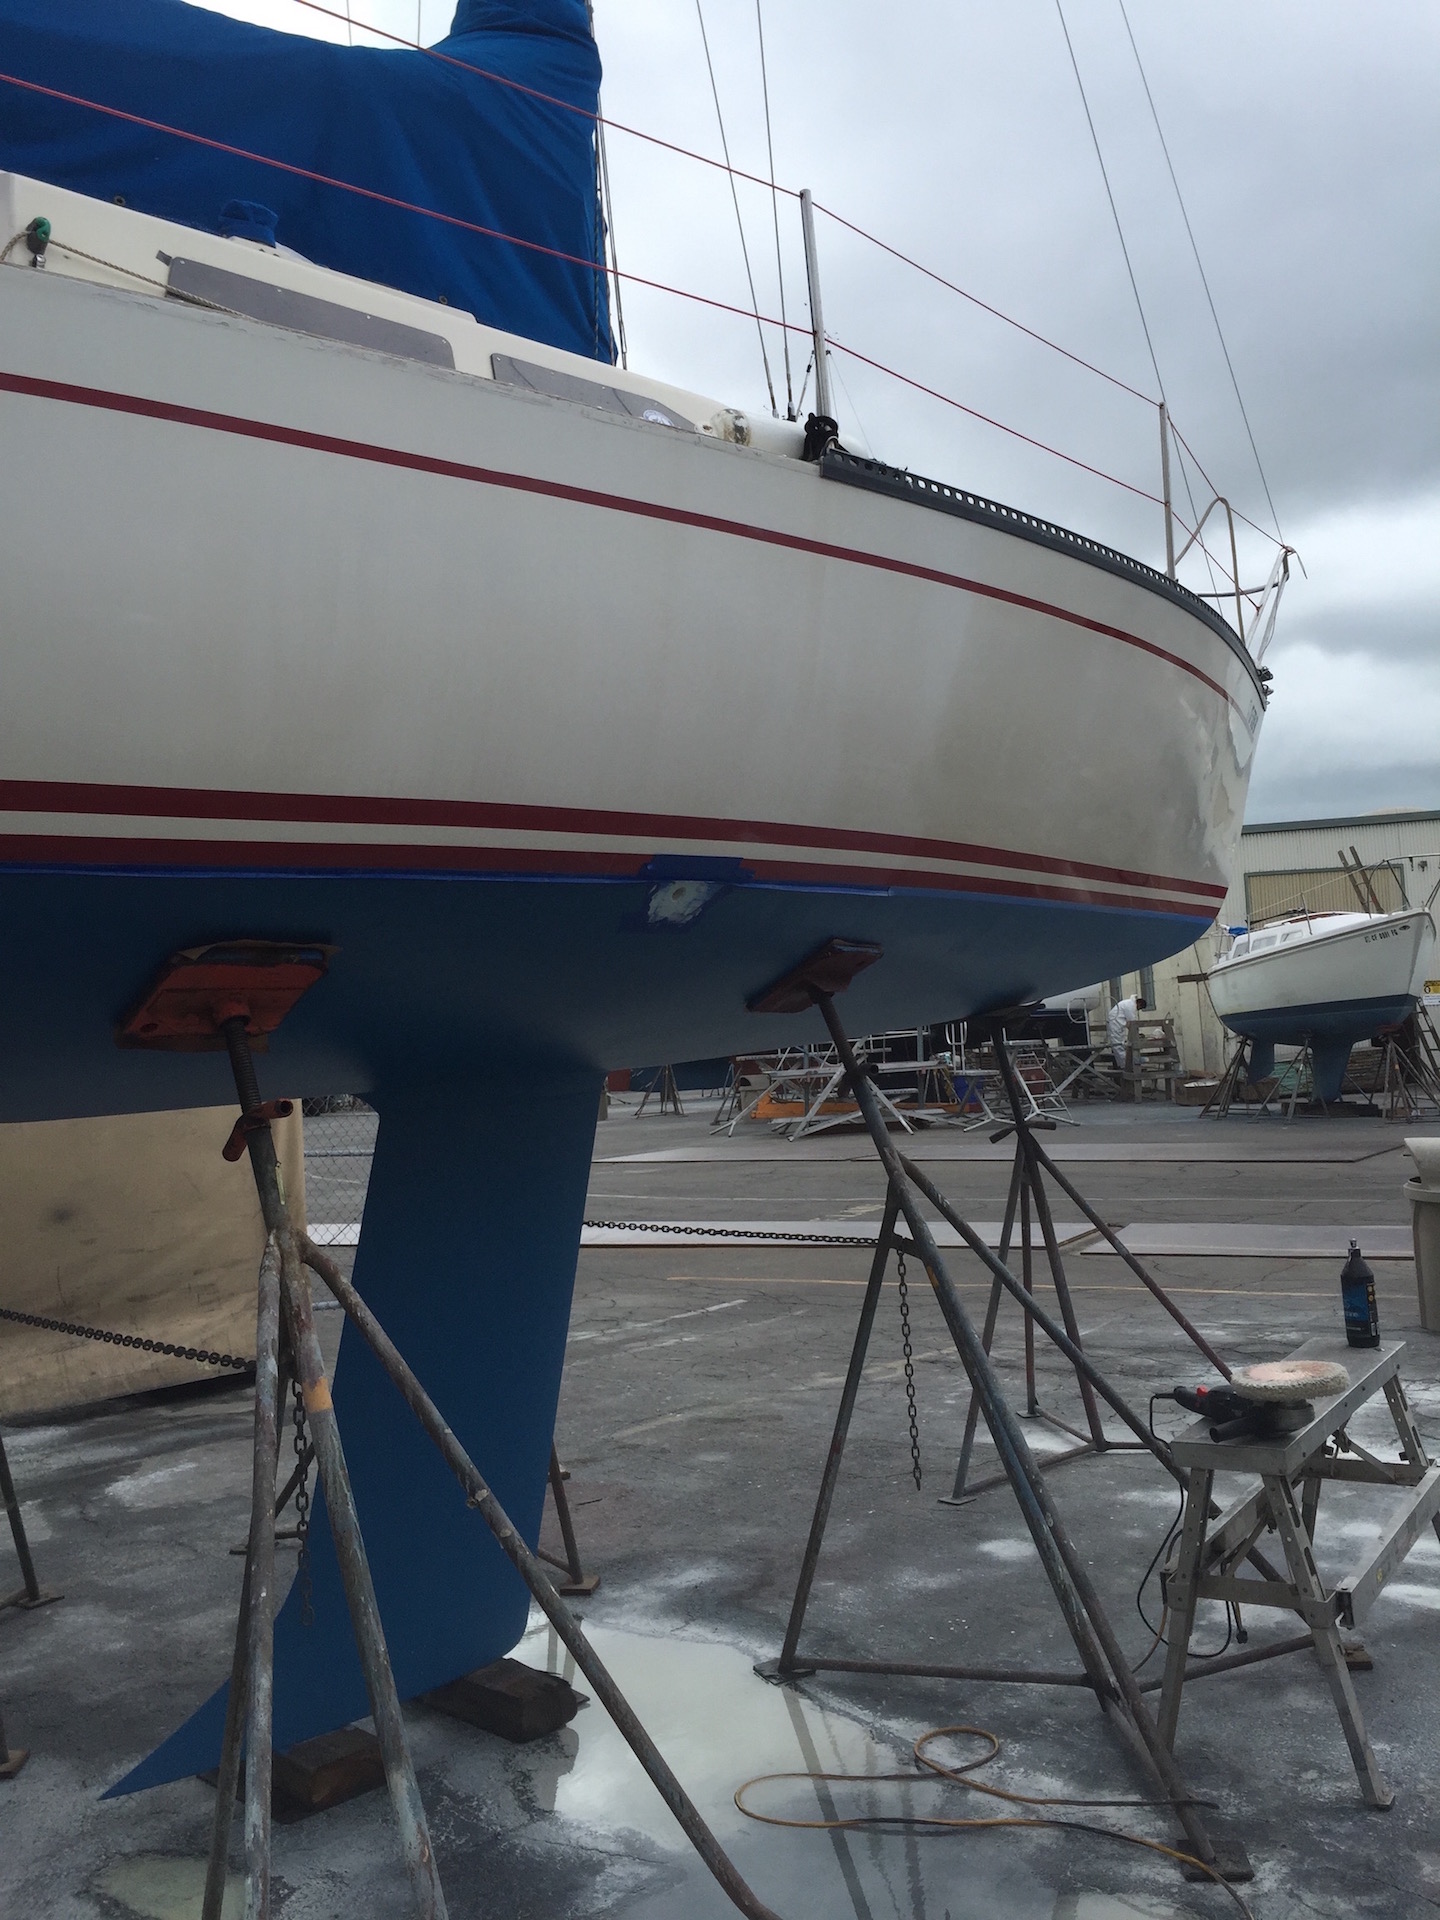 New bottom paint and thru hull.
Almost done polishing topsides. You can see the before and after.